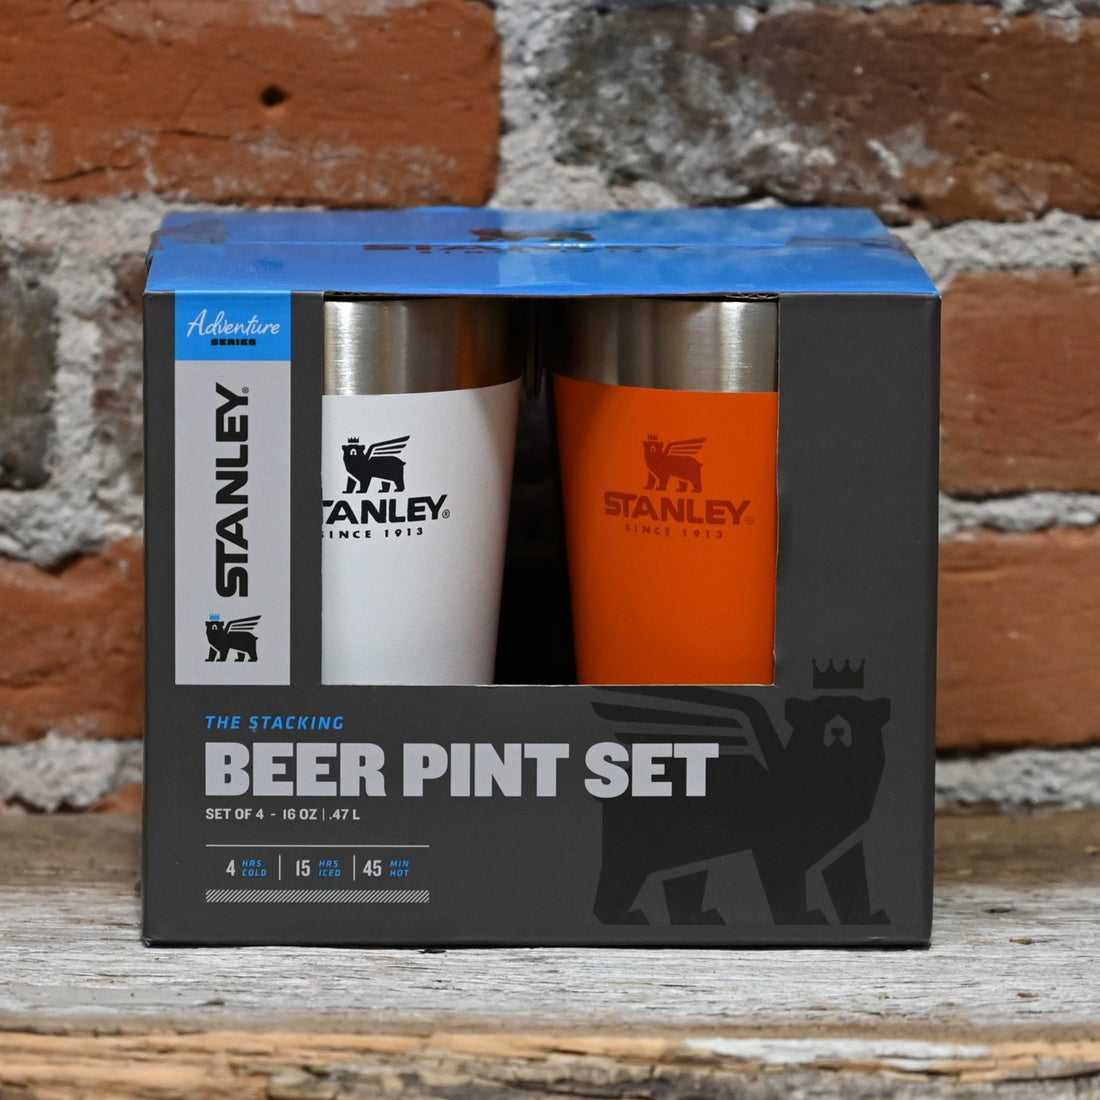 Stanley Stacking Beer Pint Set- 4 pack multi-pack view of pints